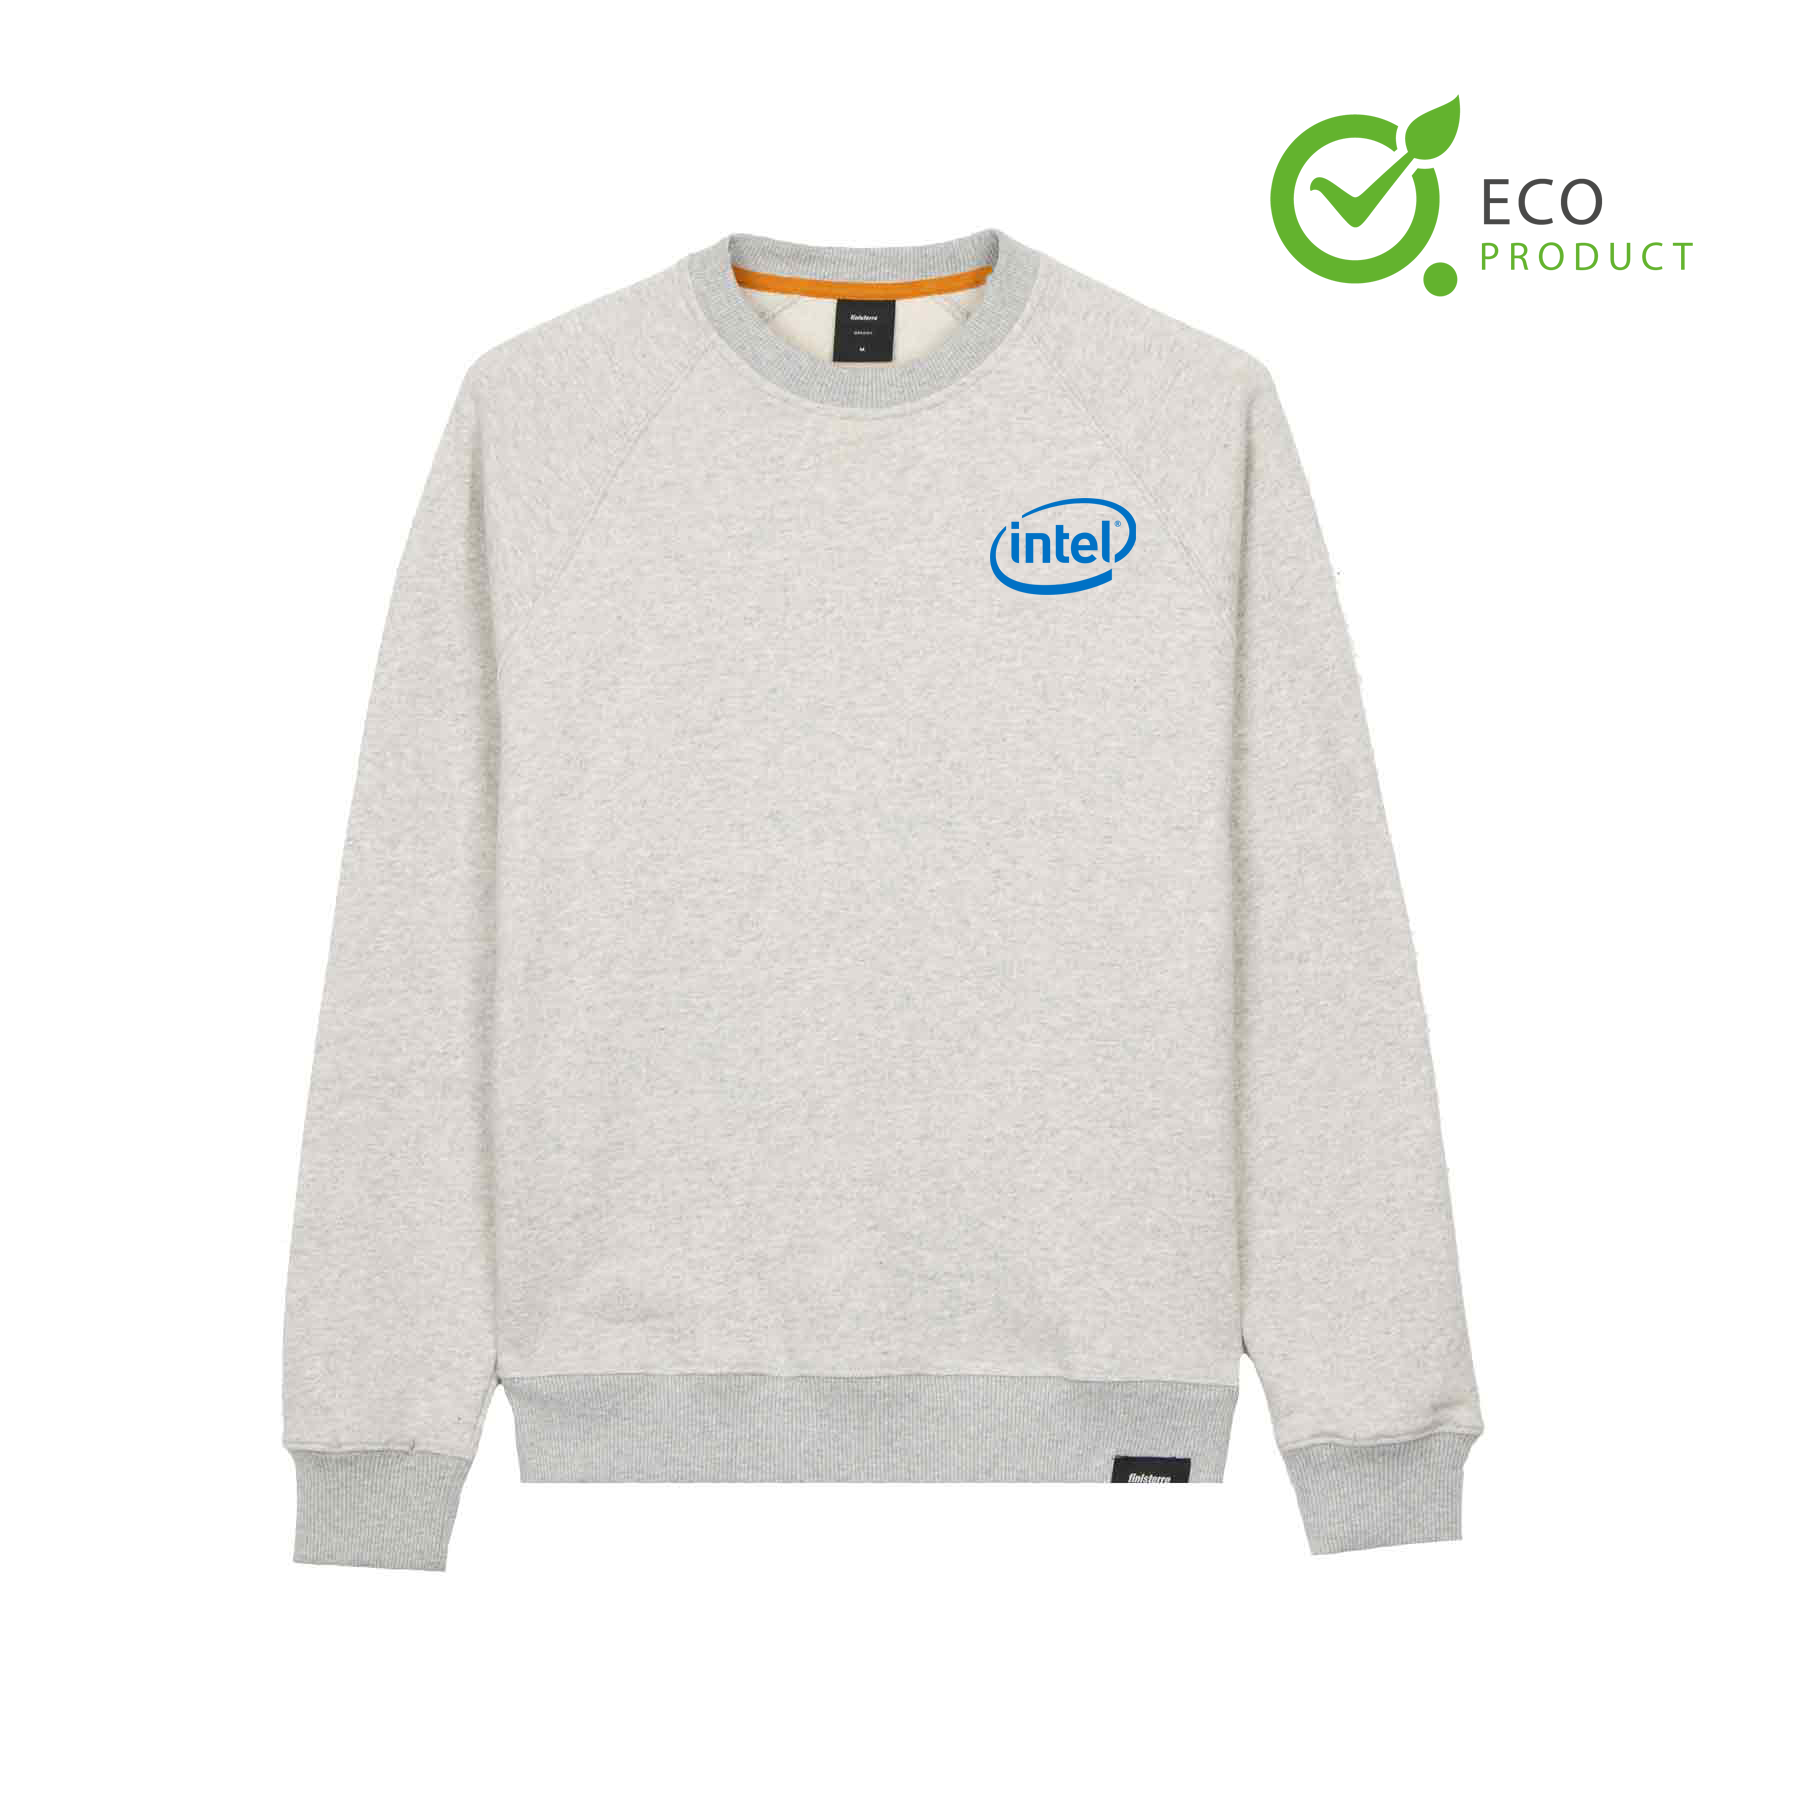 Co-Branded Finisterre Sweatshirt Branded With Your Logo